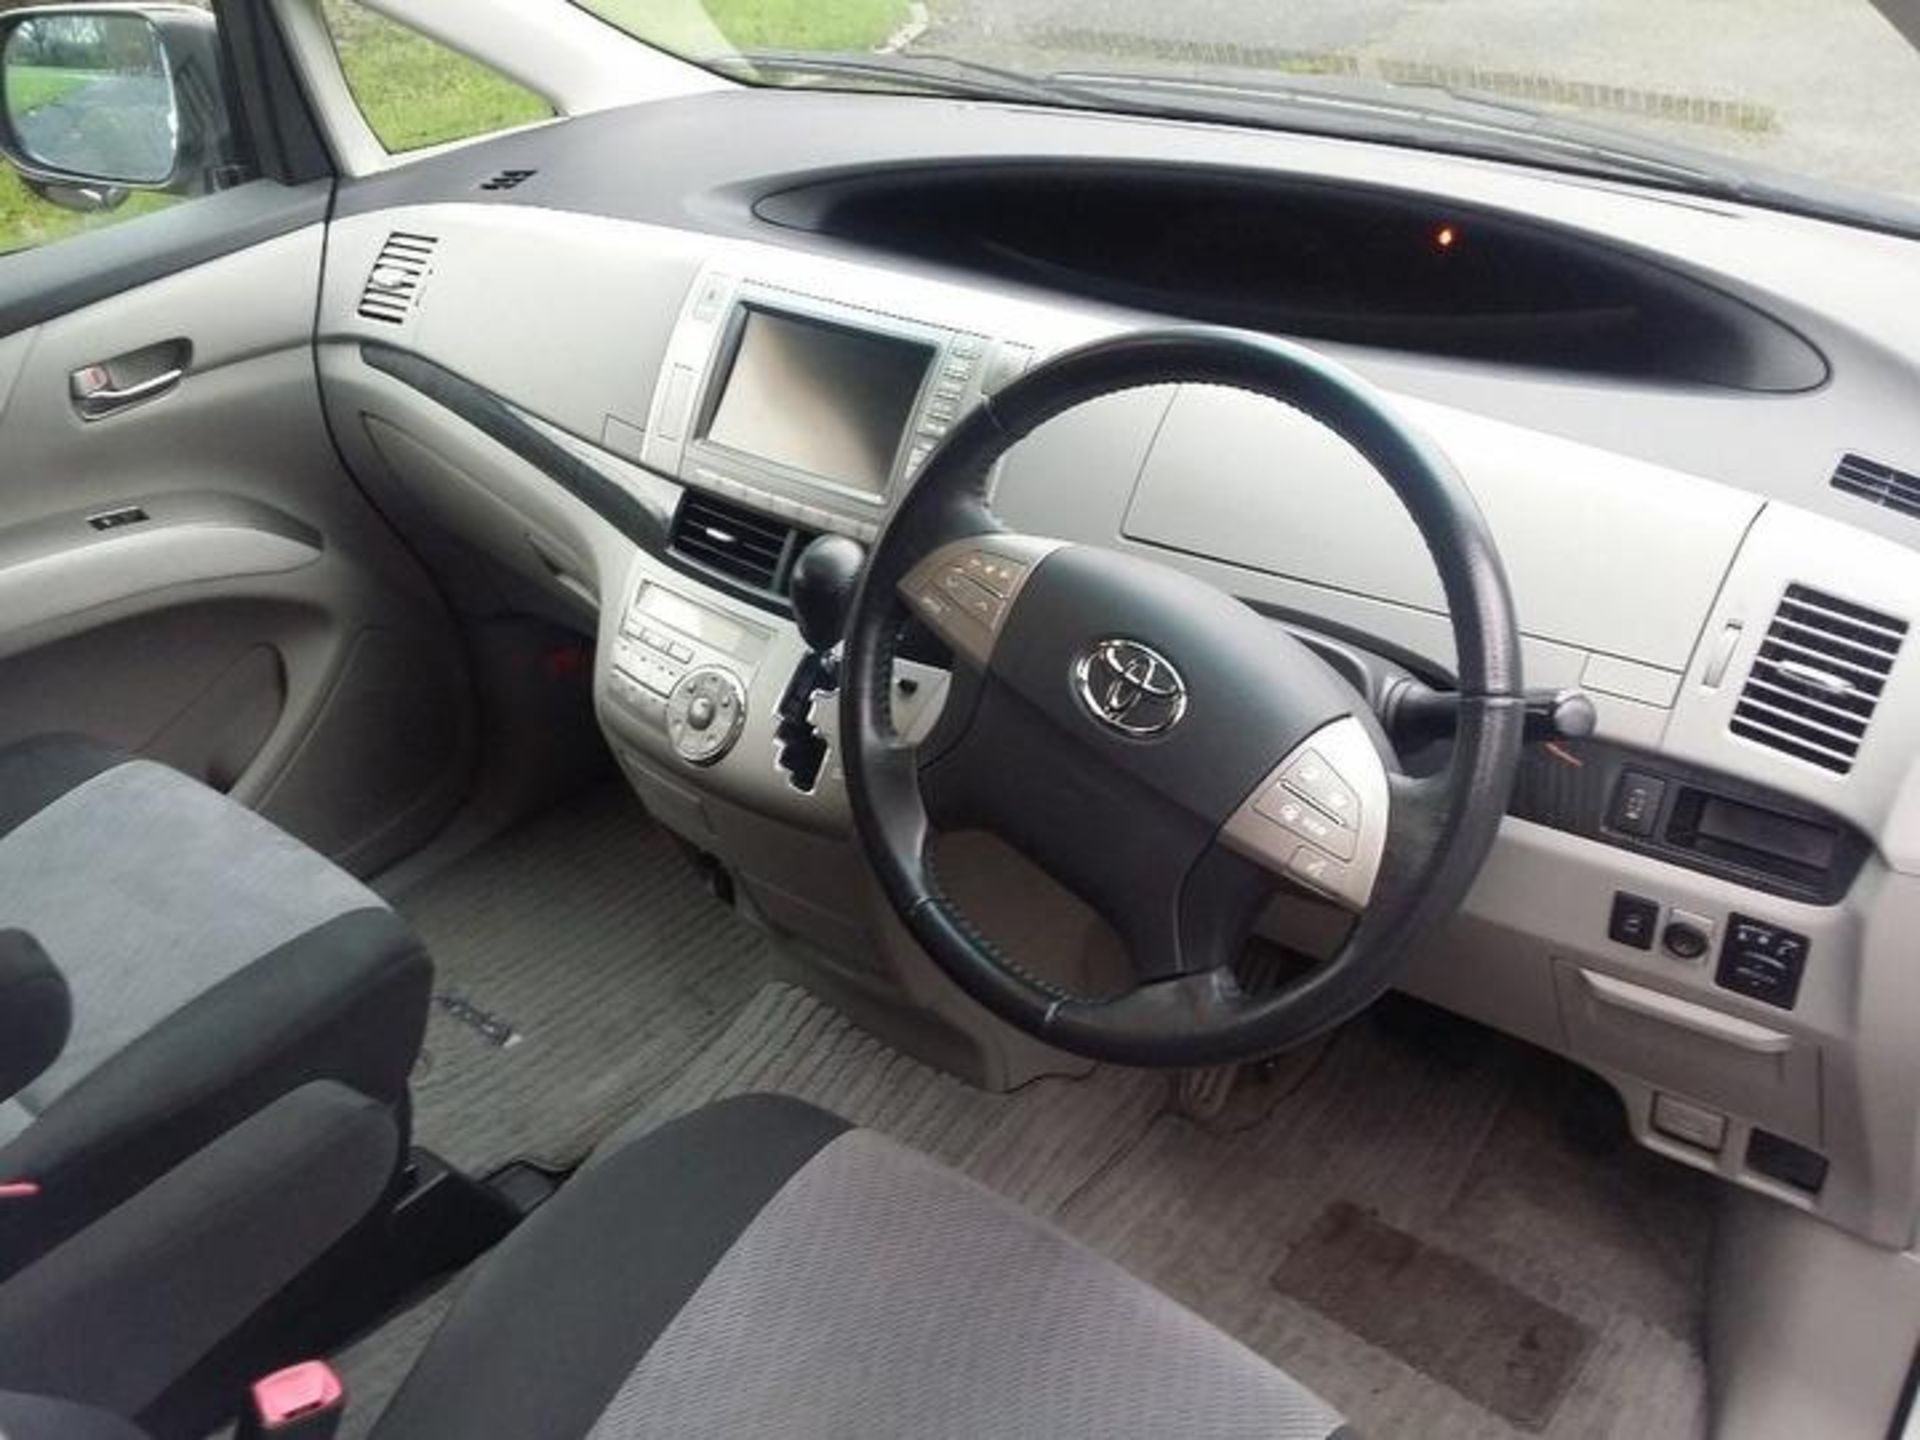 TOYOTA, ESTIMA 2-4 MPV, PA06 AKO, 2-4 LTR, PETROL, AUTOMATIC 7 SPEED, 5 DOOR MPV, IMPORTED FIRST - Image 15 of 27